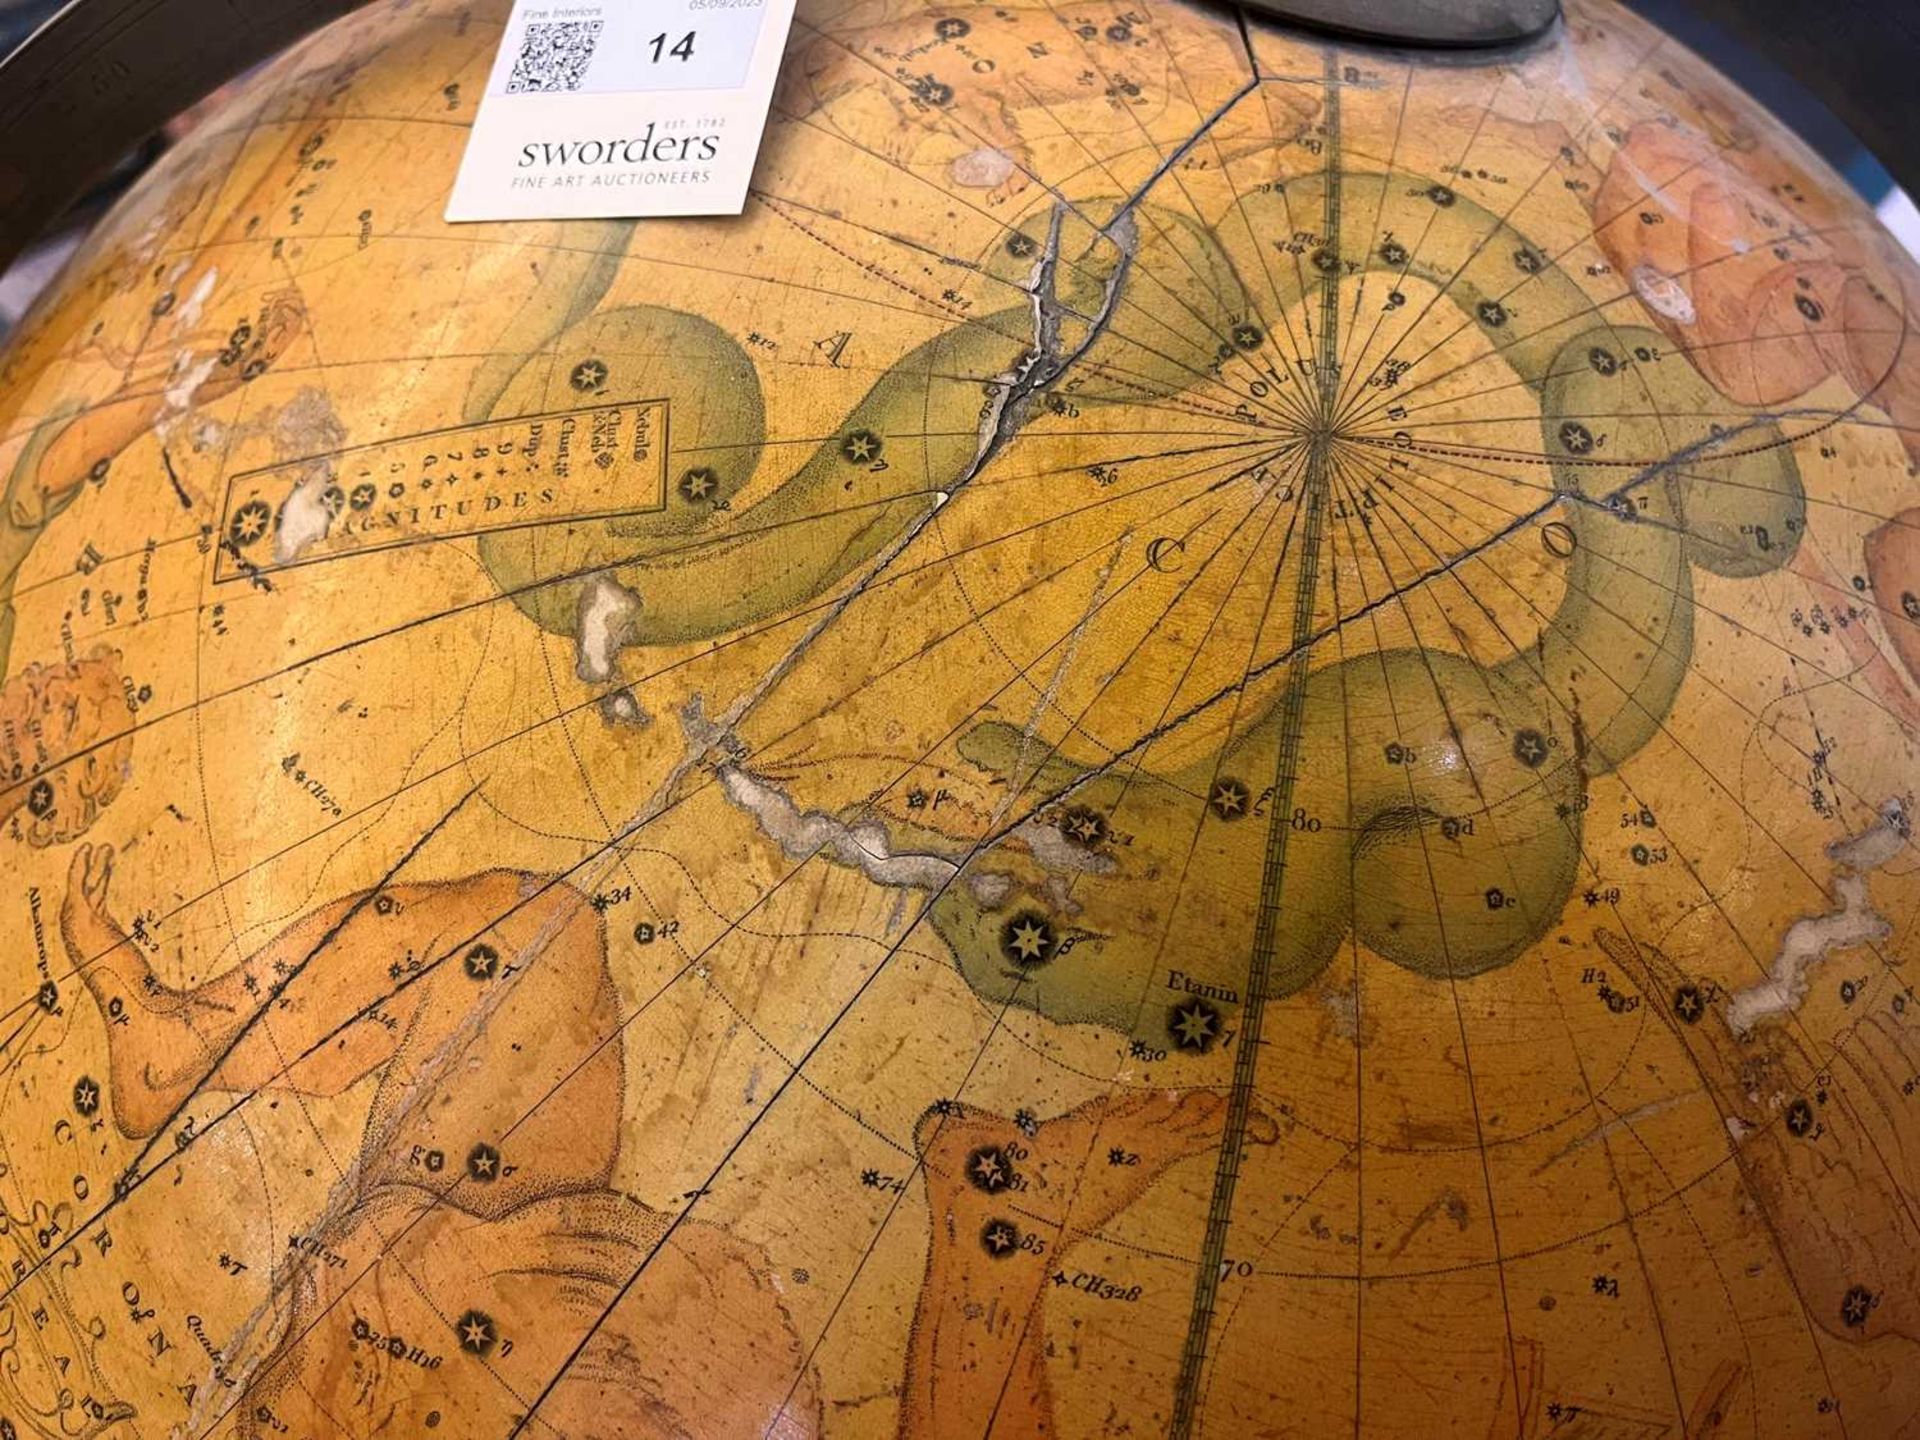 A large celestial library globe by J & W Cary, - Image 29 of 84